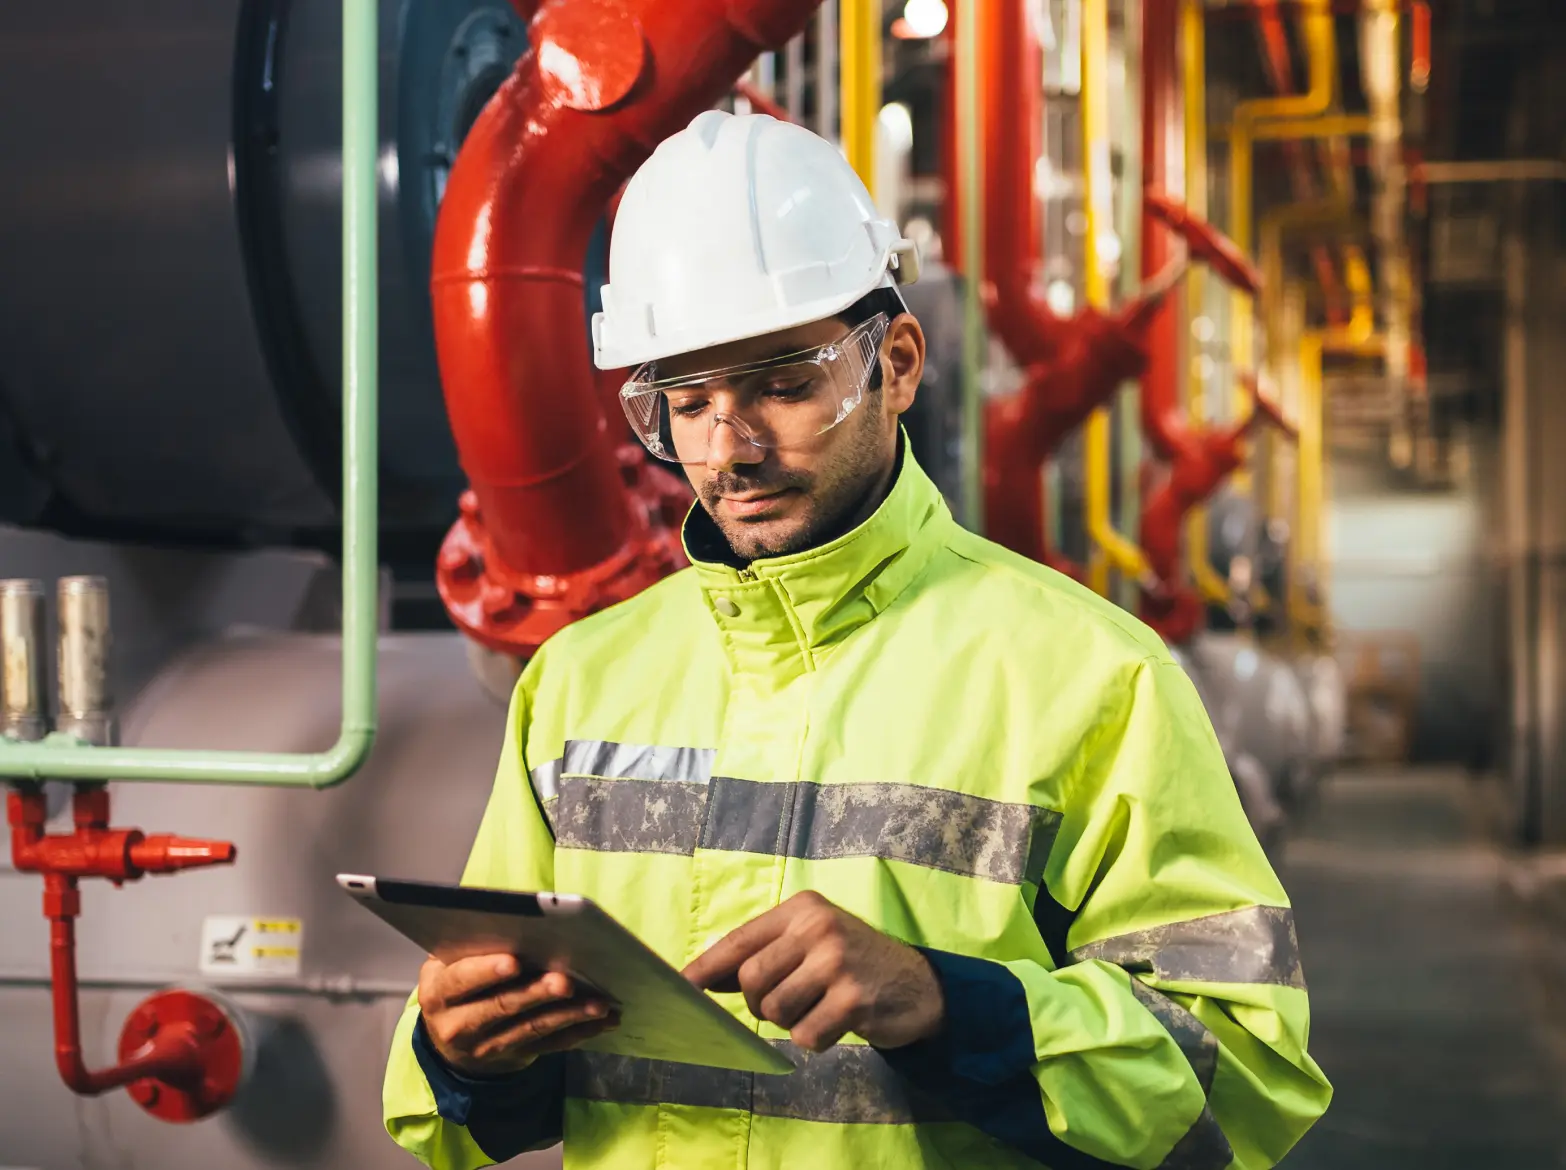 Worker looking down at a tablet with an industrial backdrop.